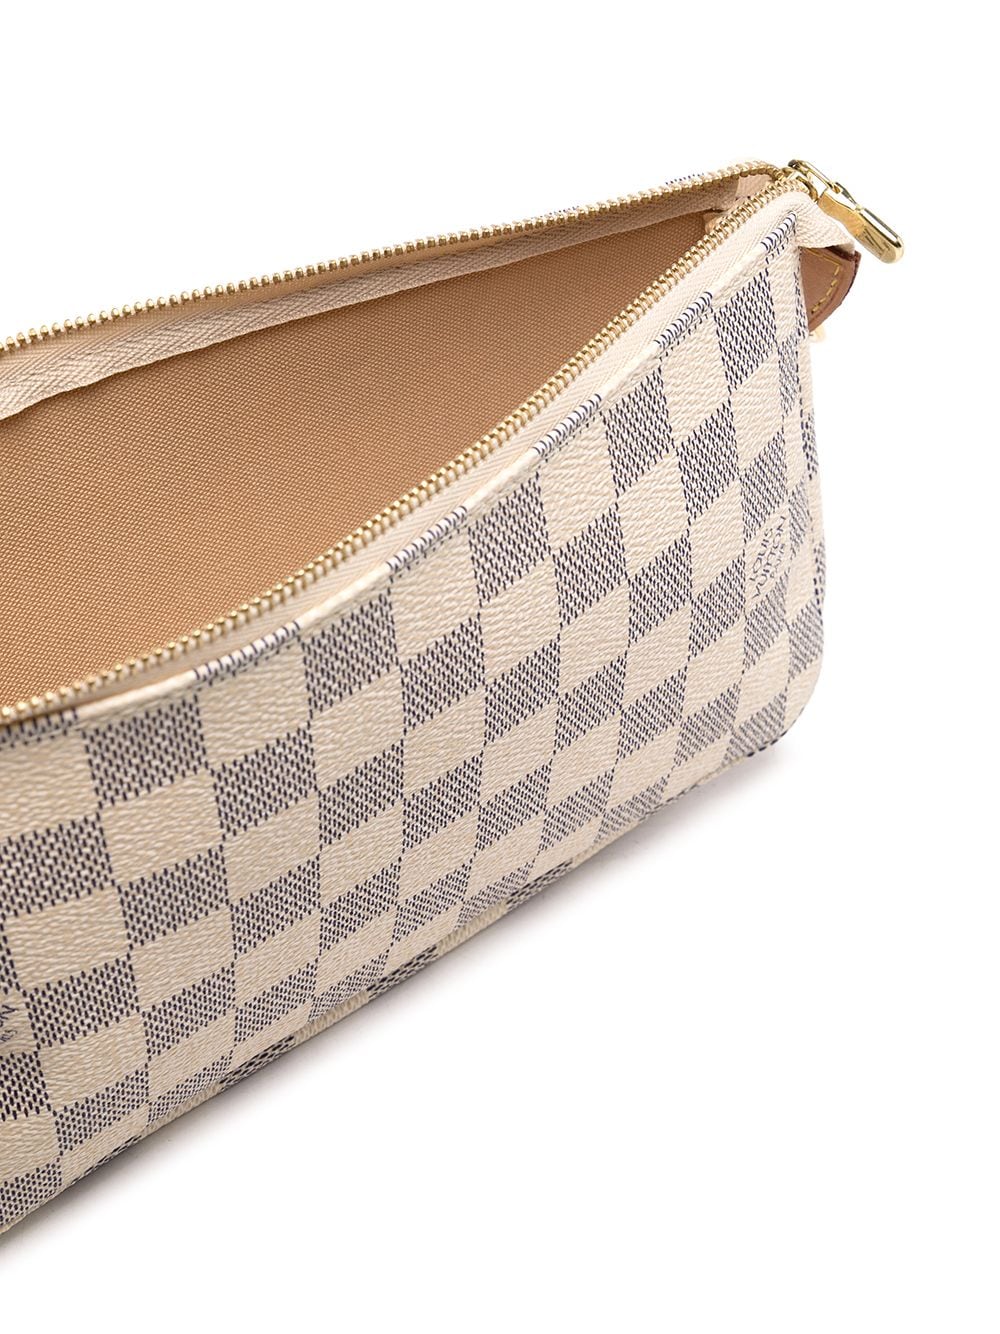 louis vuitton gray and white checked purse